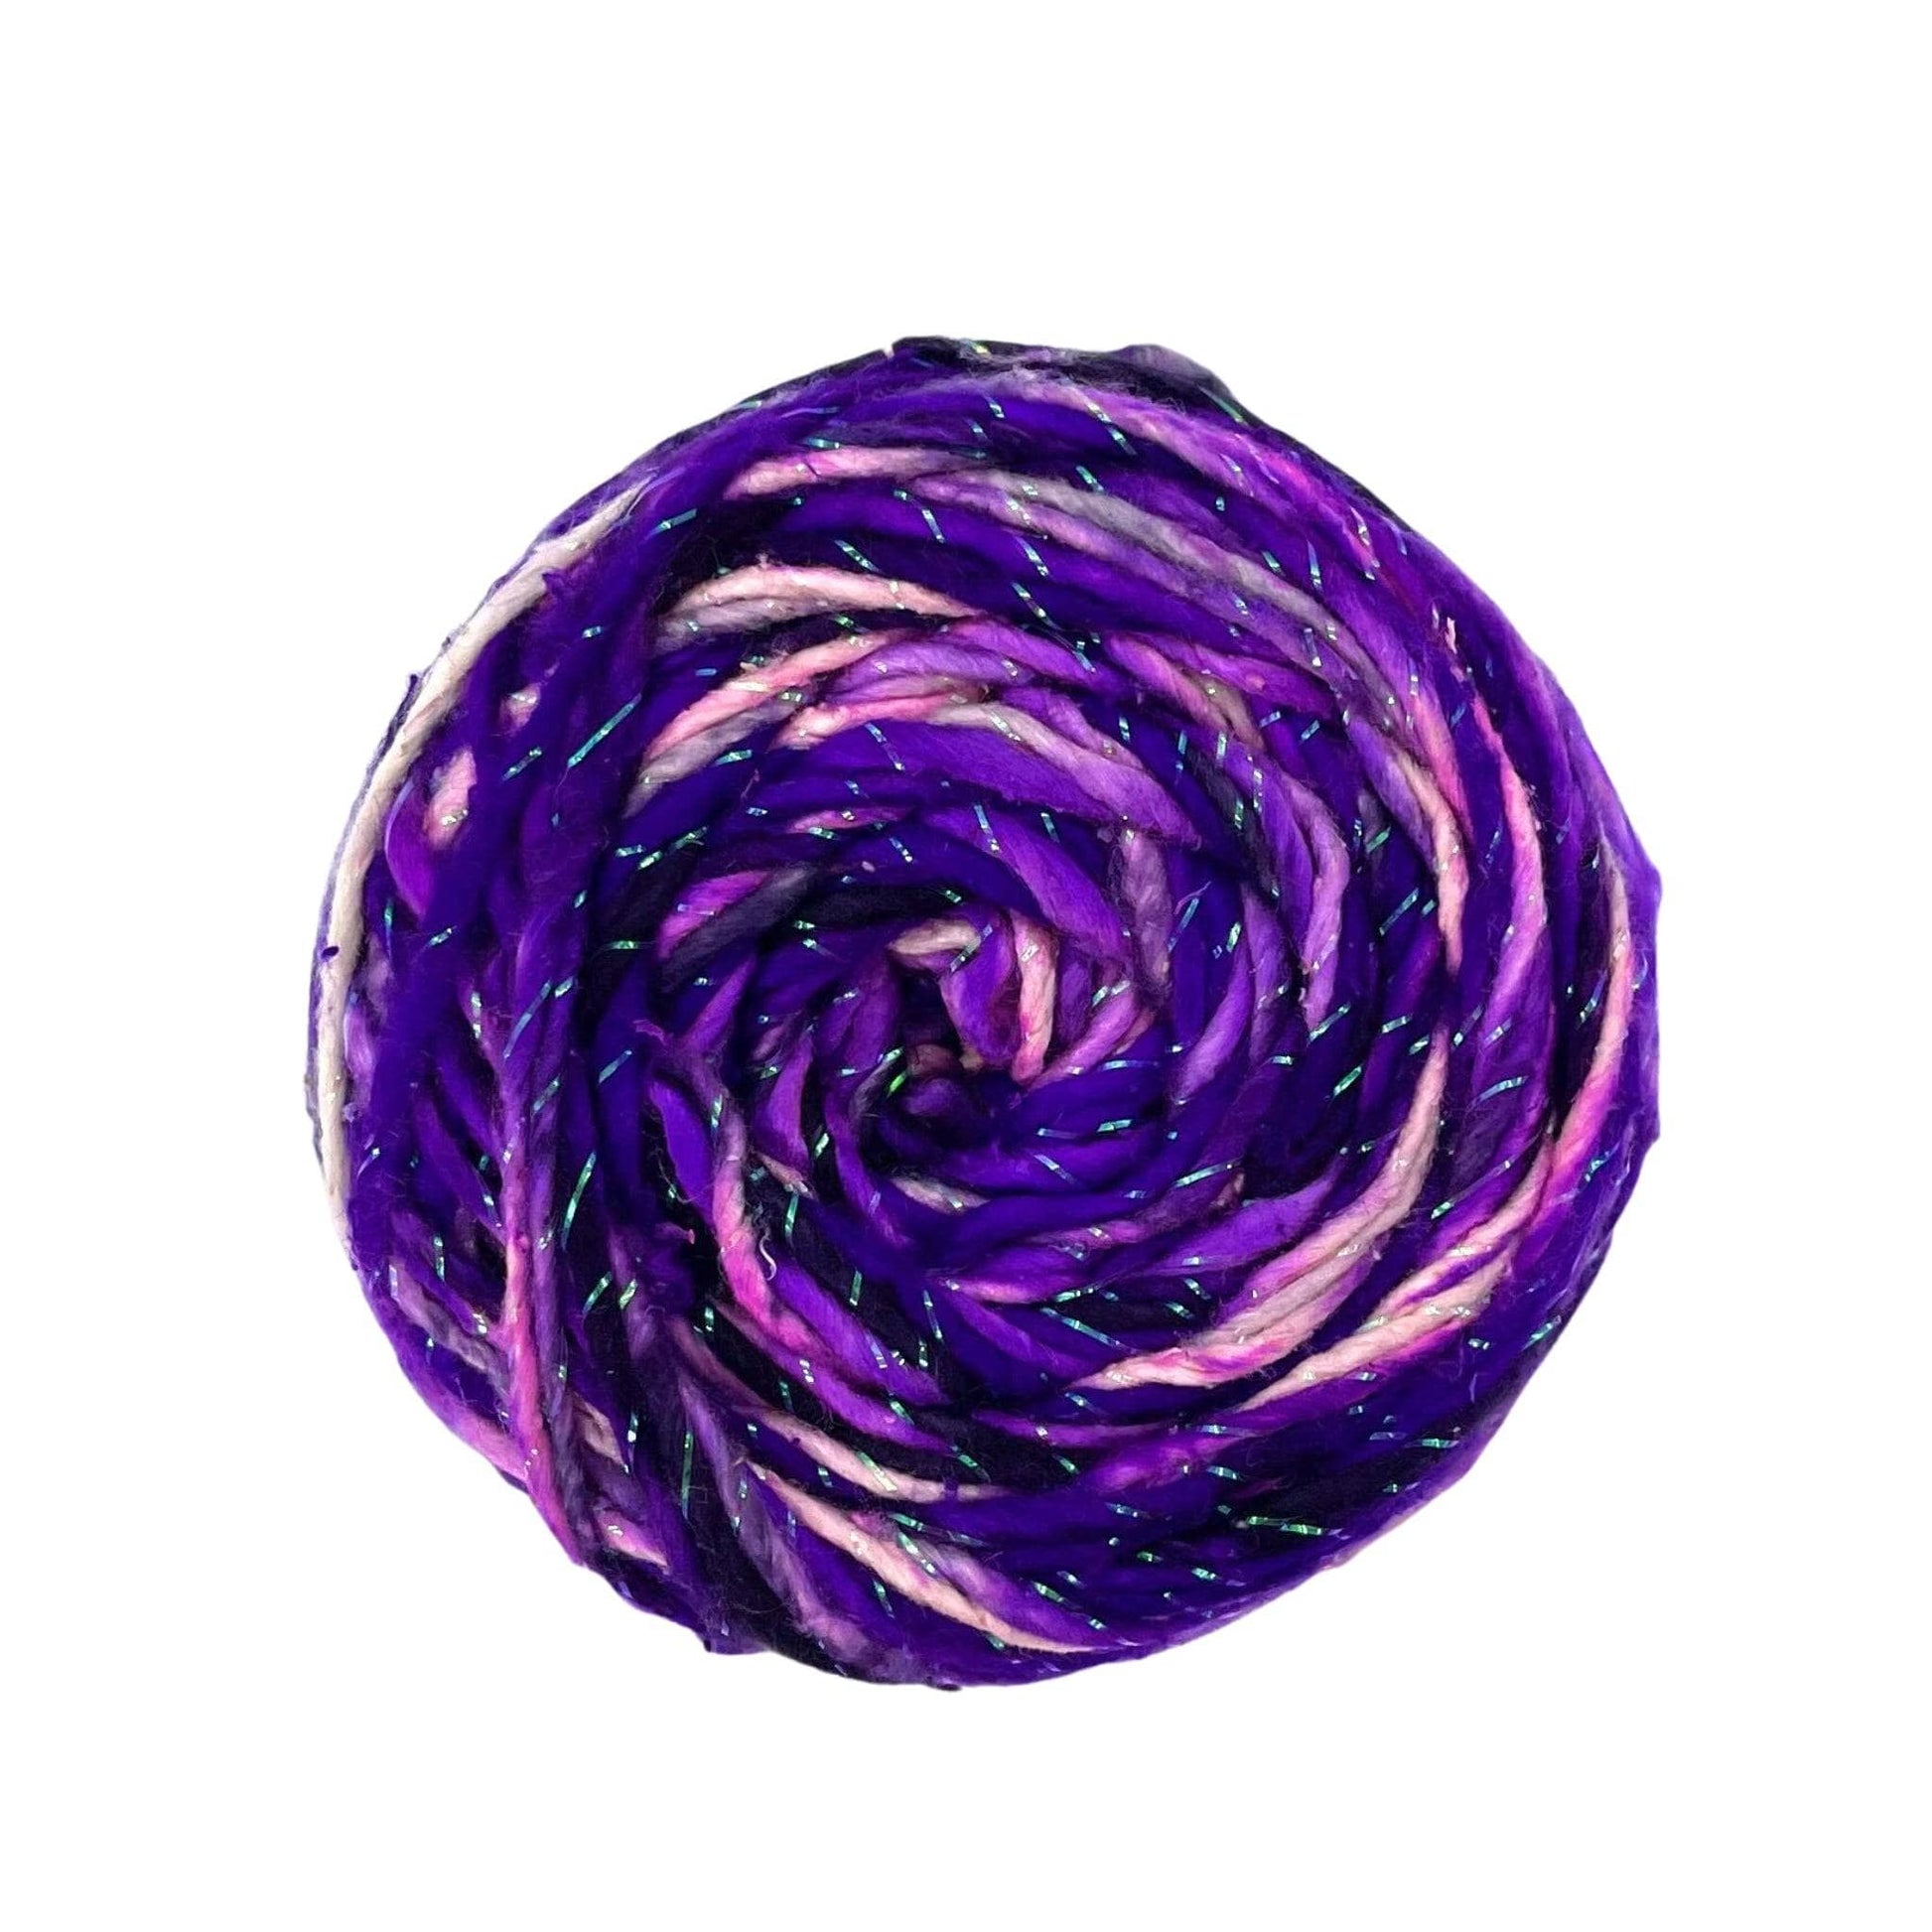 An overhead view of a cake of sparkle worsted weight silk yarn in the color Frostbite. This yarn is white and black with purple ombre dyed in. There is a strand of sparkle spun into this yarn.